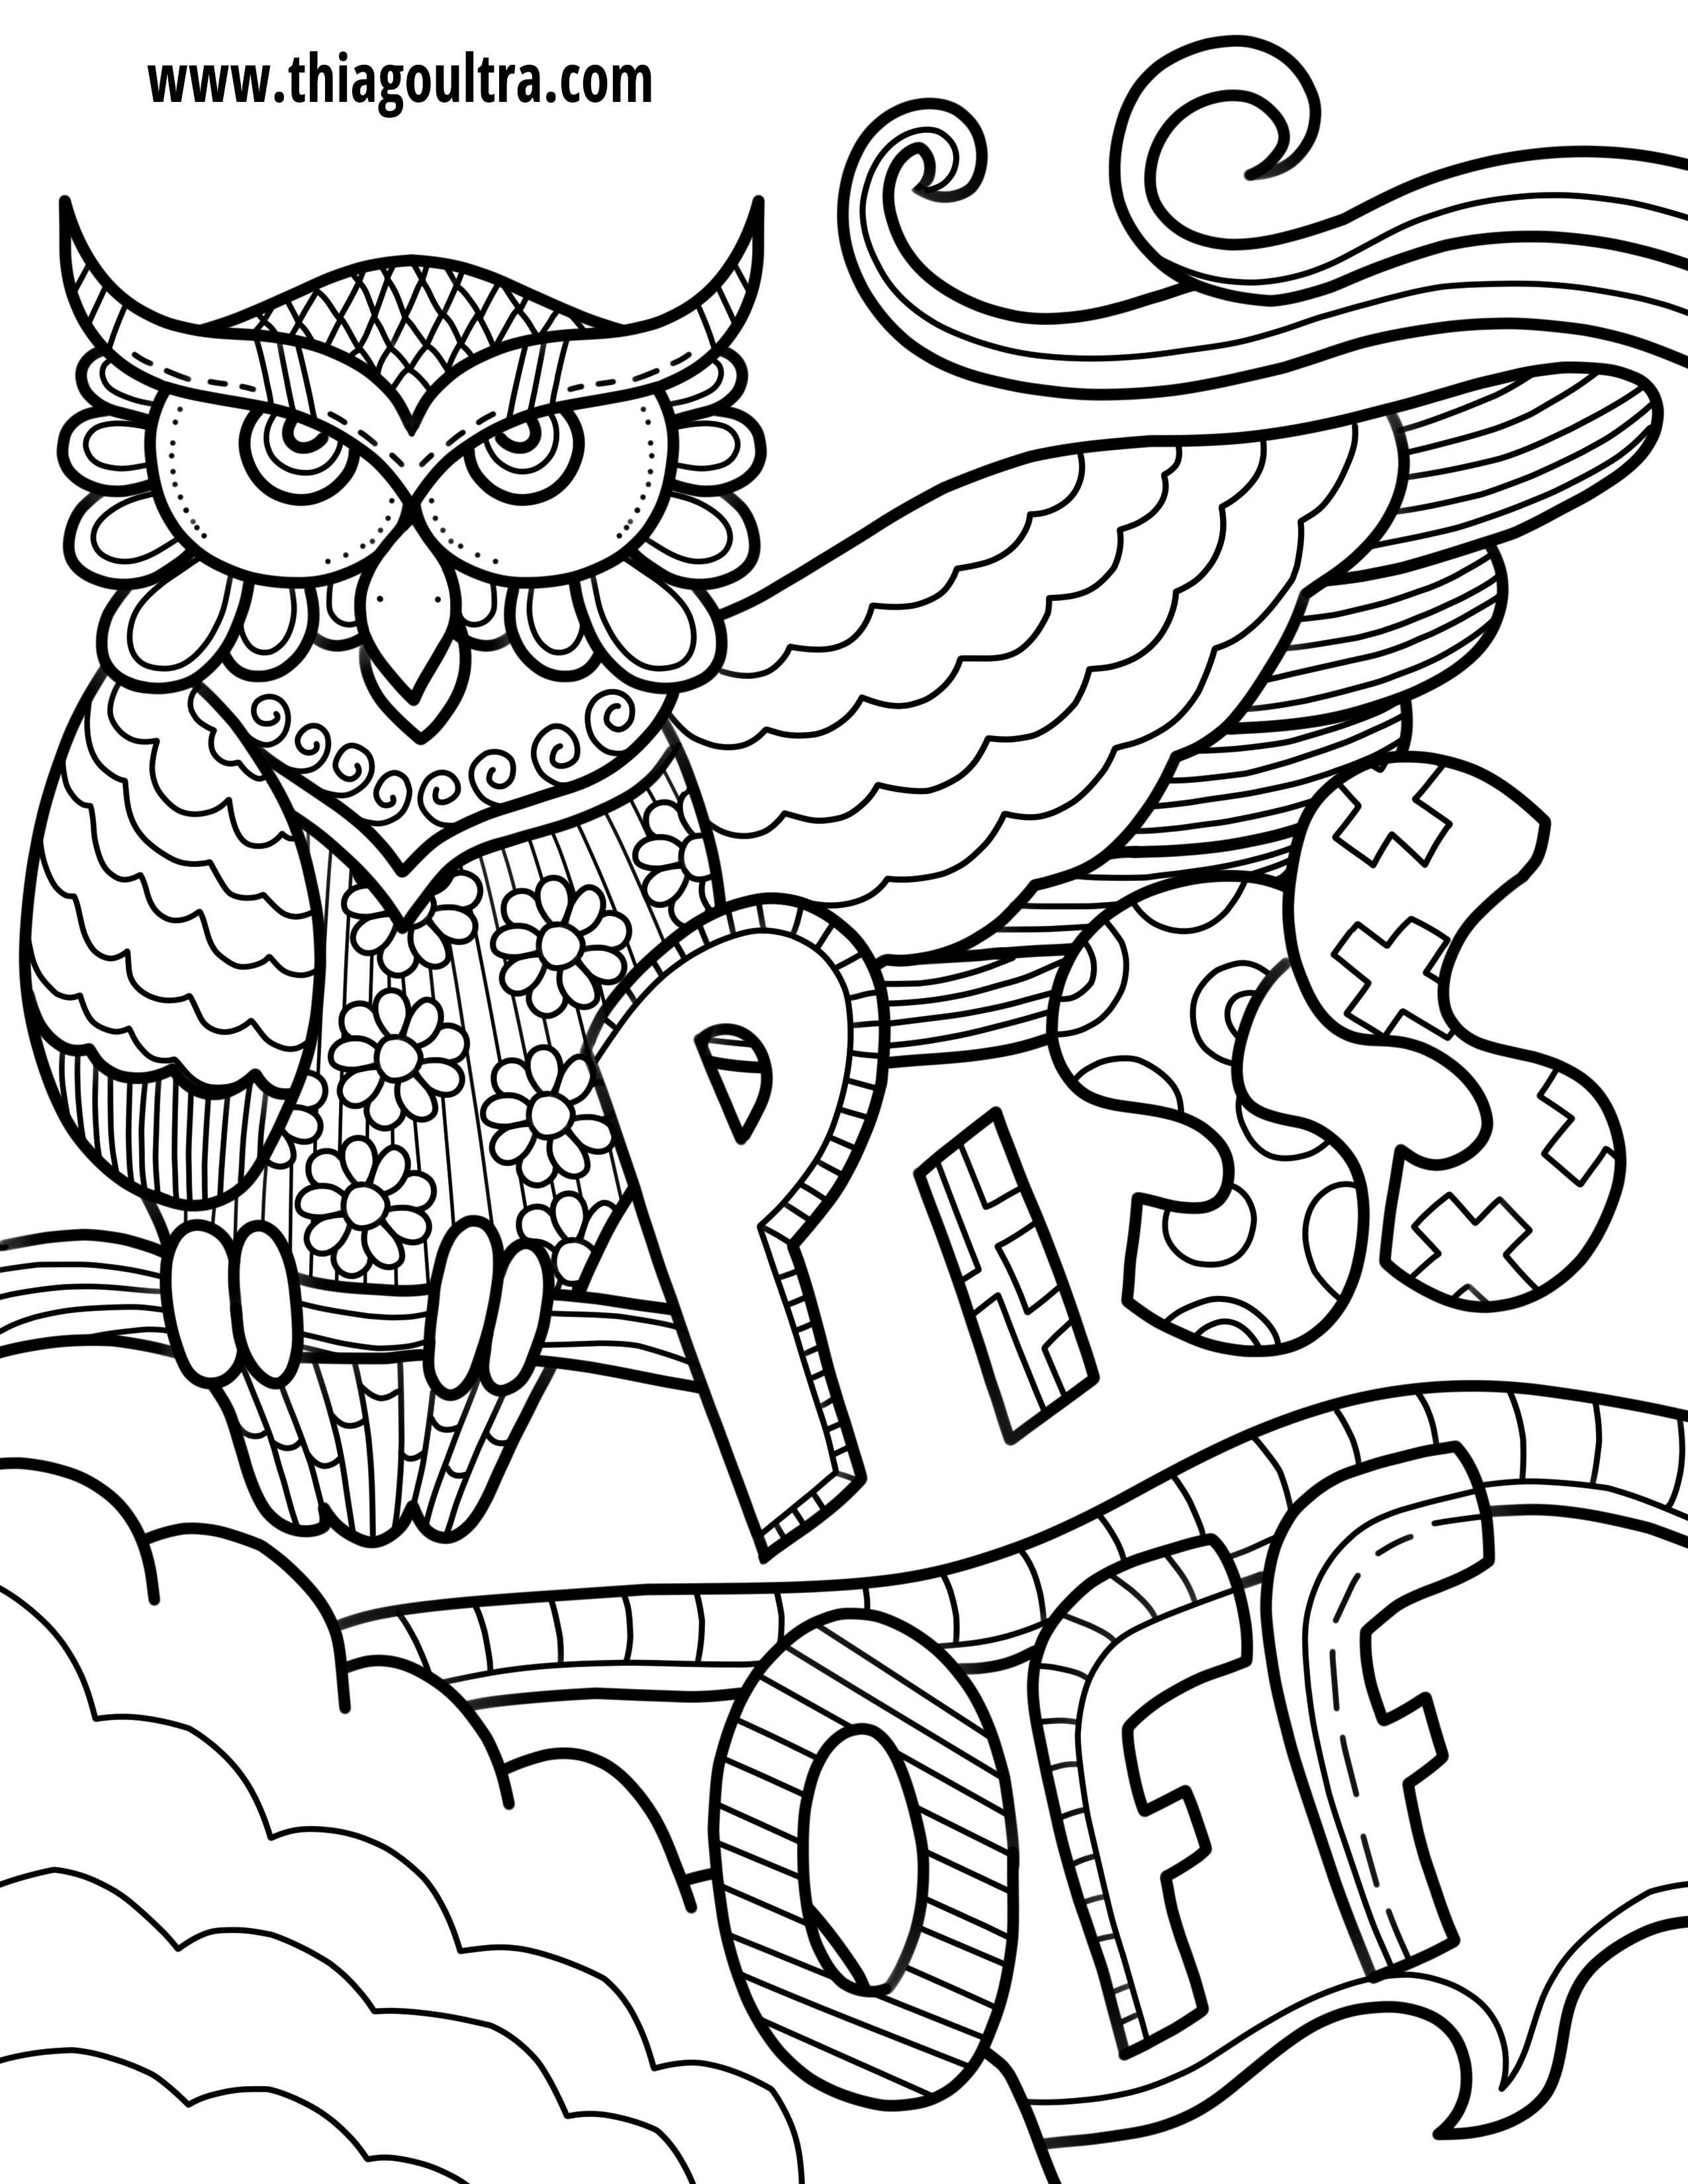 Challenge Free Printable Coloring Pages For Adults Only Swear Words - Free Printable Coloring Pages For Adults Only Swear Words